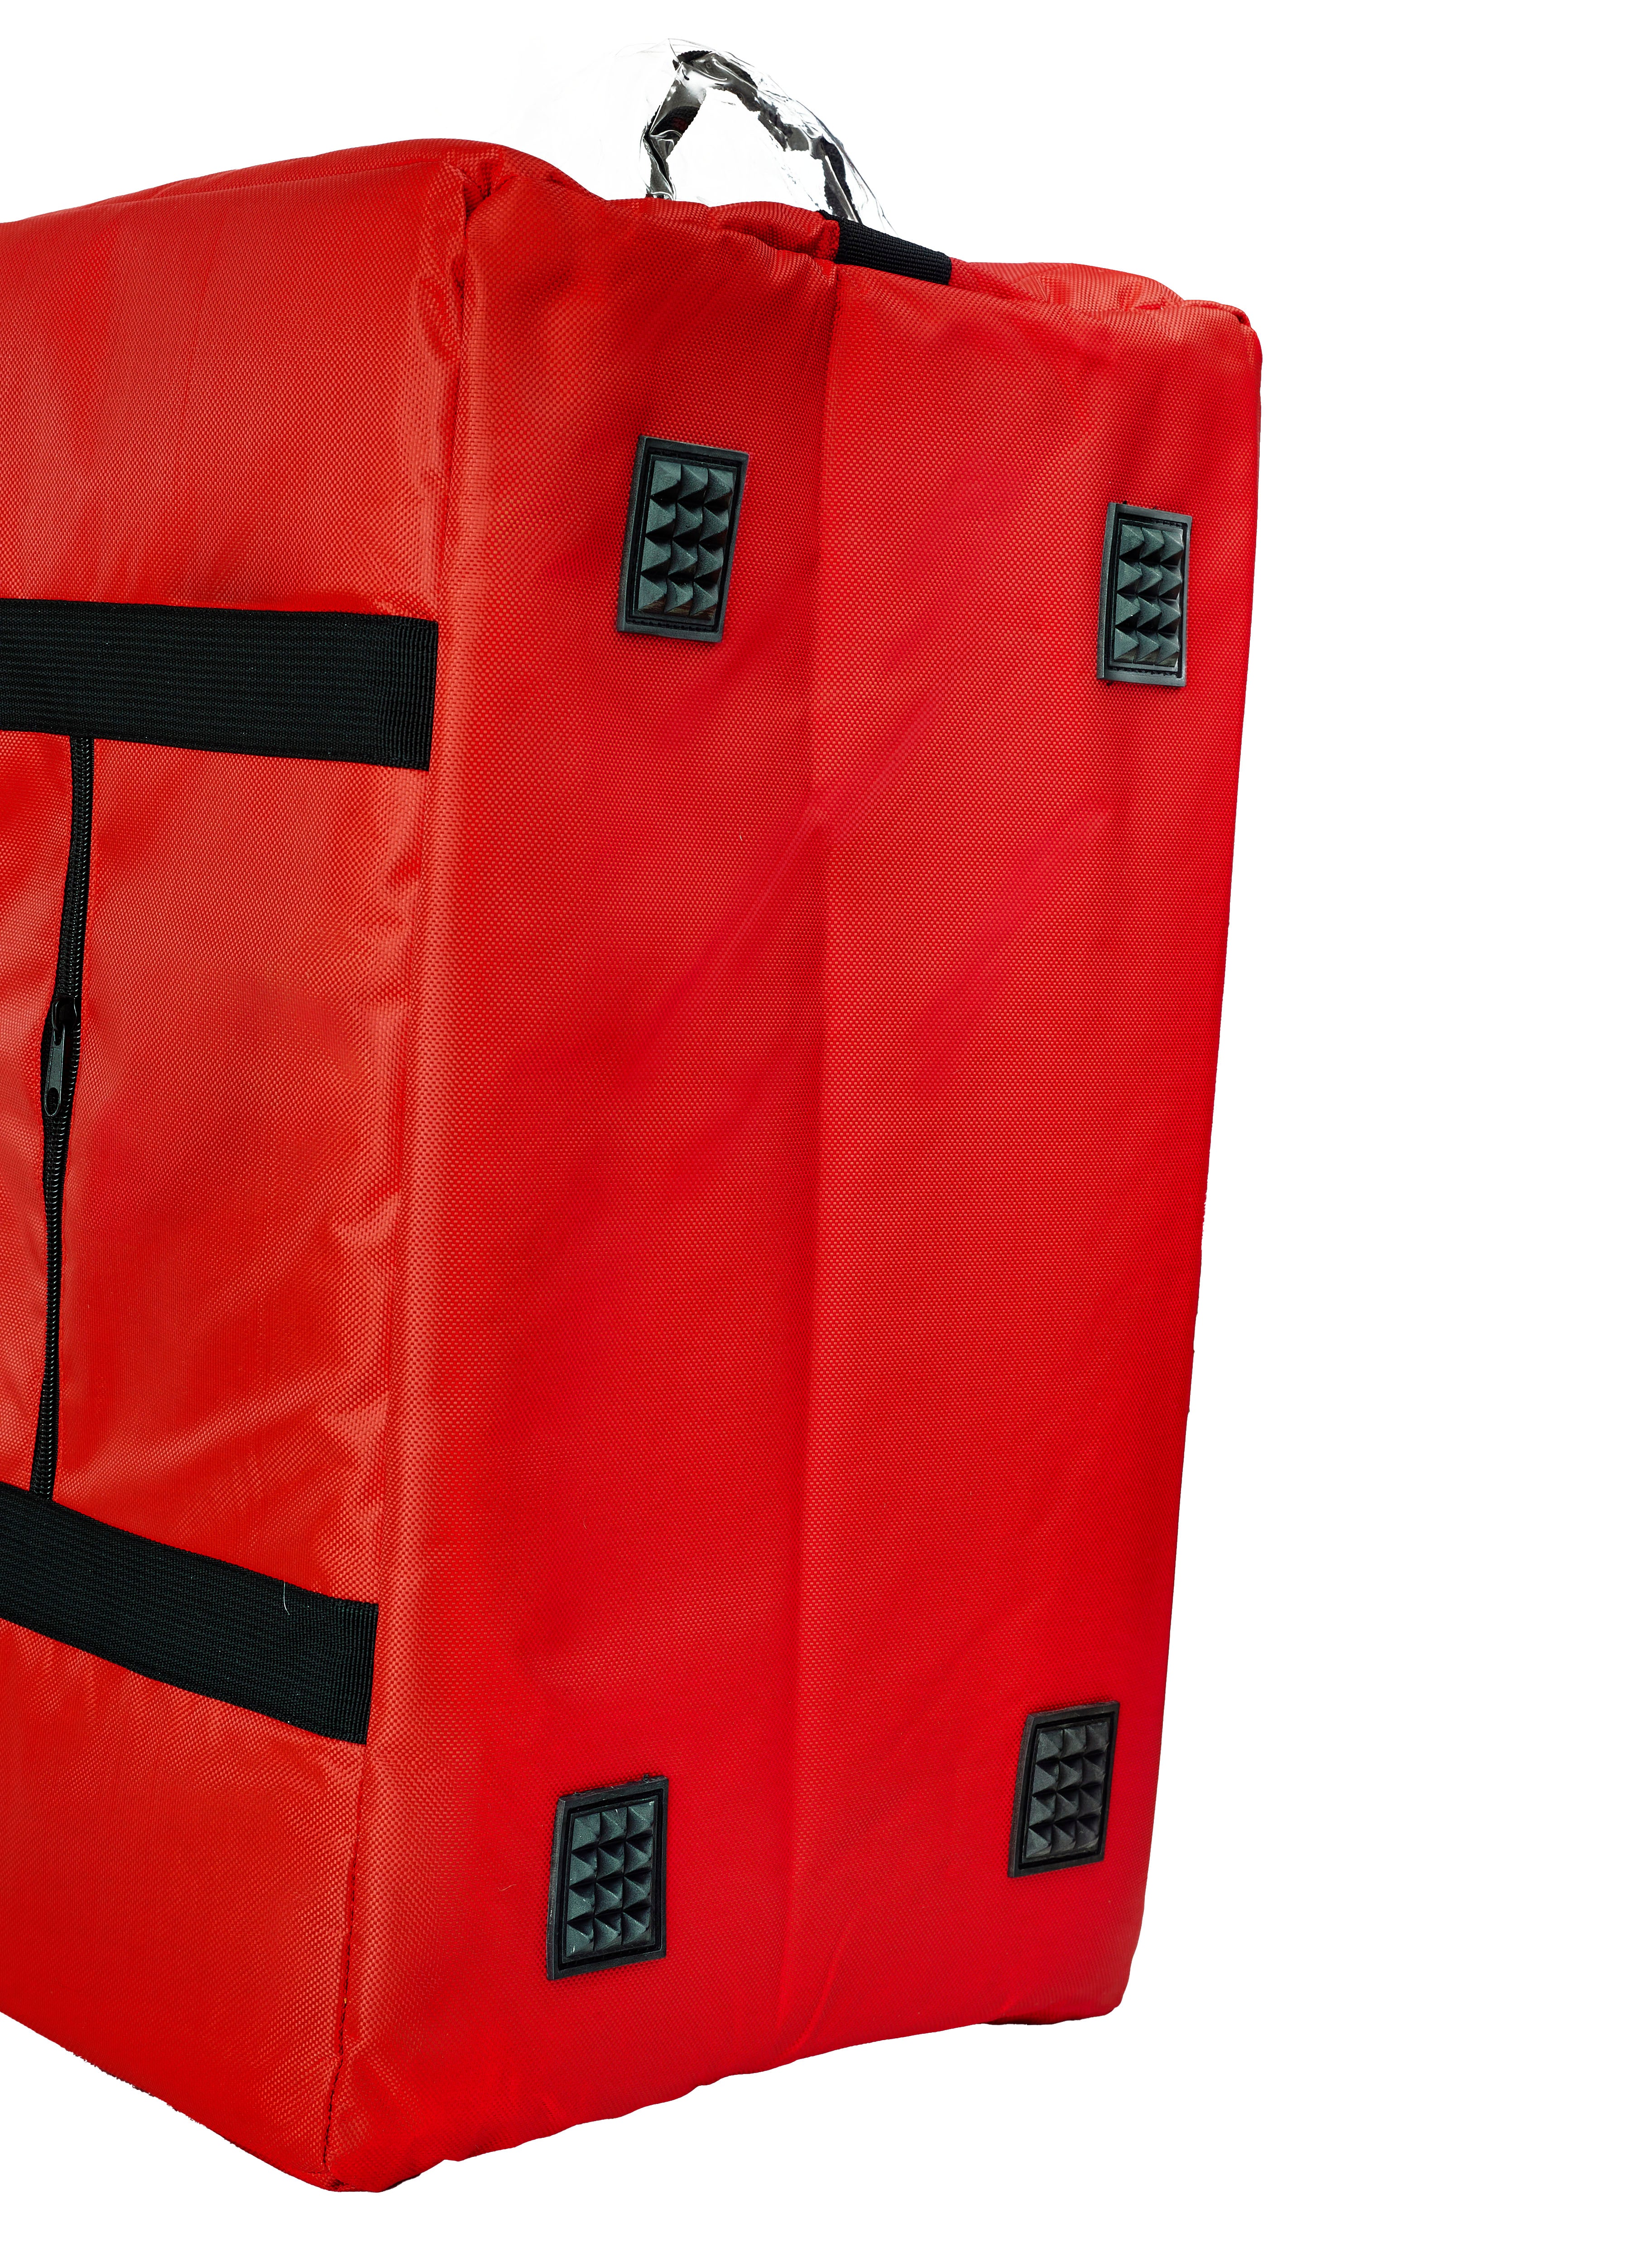 PB02-PSD-RED Pasta/Sandwich & Drink Carrier (Red)